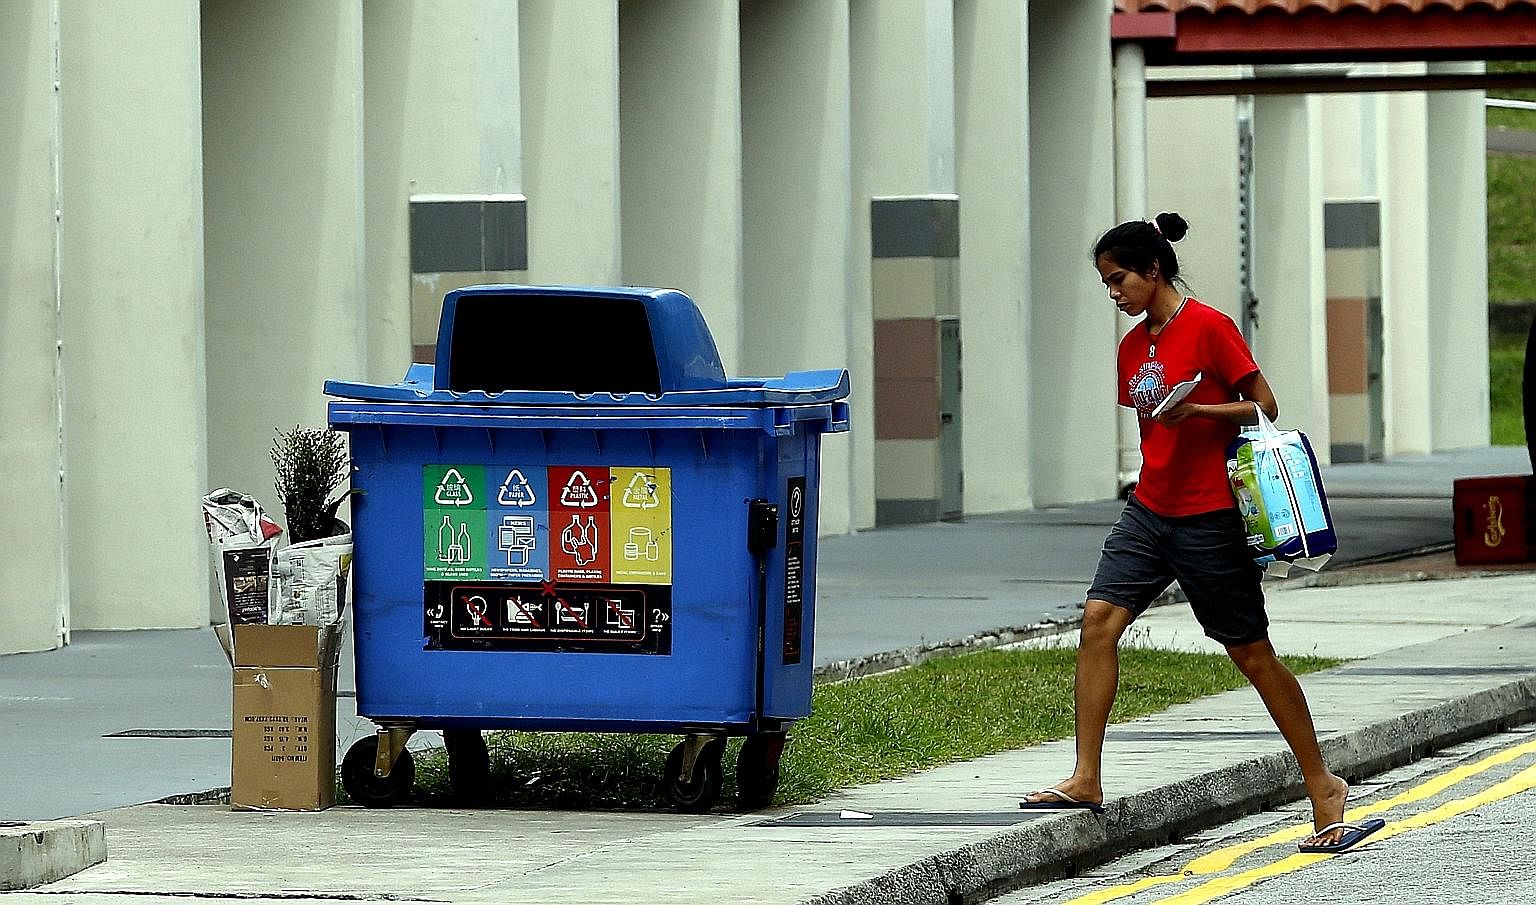 Since September 2014, every HDB block has had a blue recycling bin, in which people put paper, plastics and other recyclables, placed nearby.